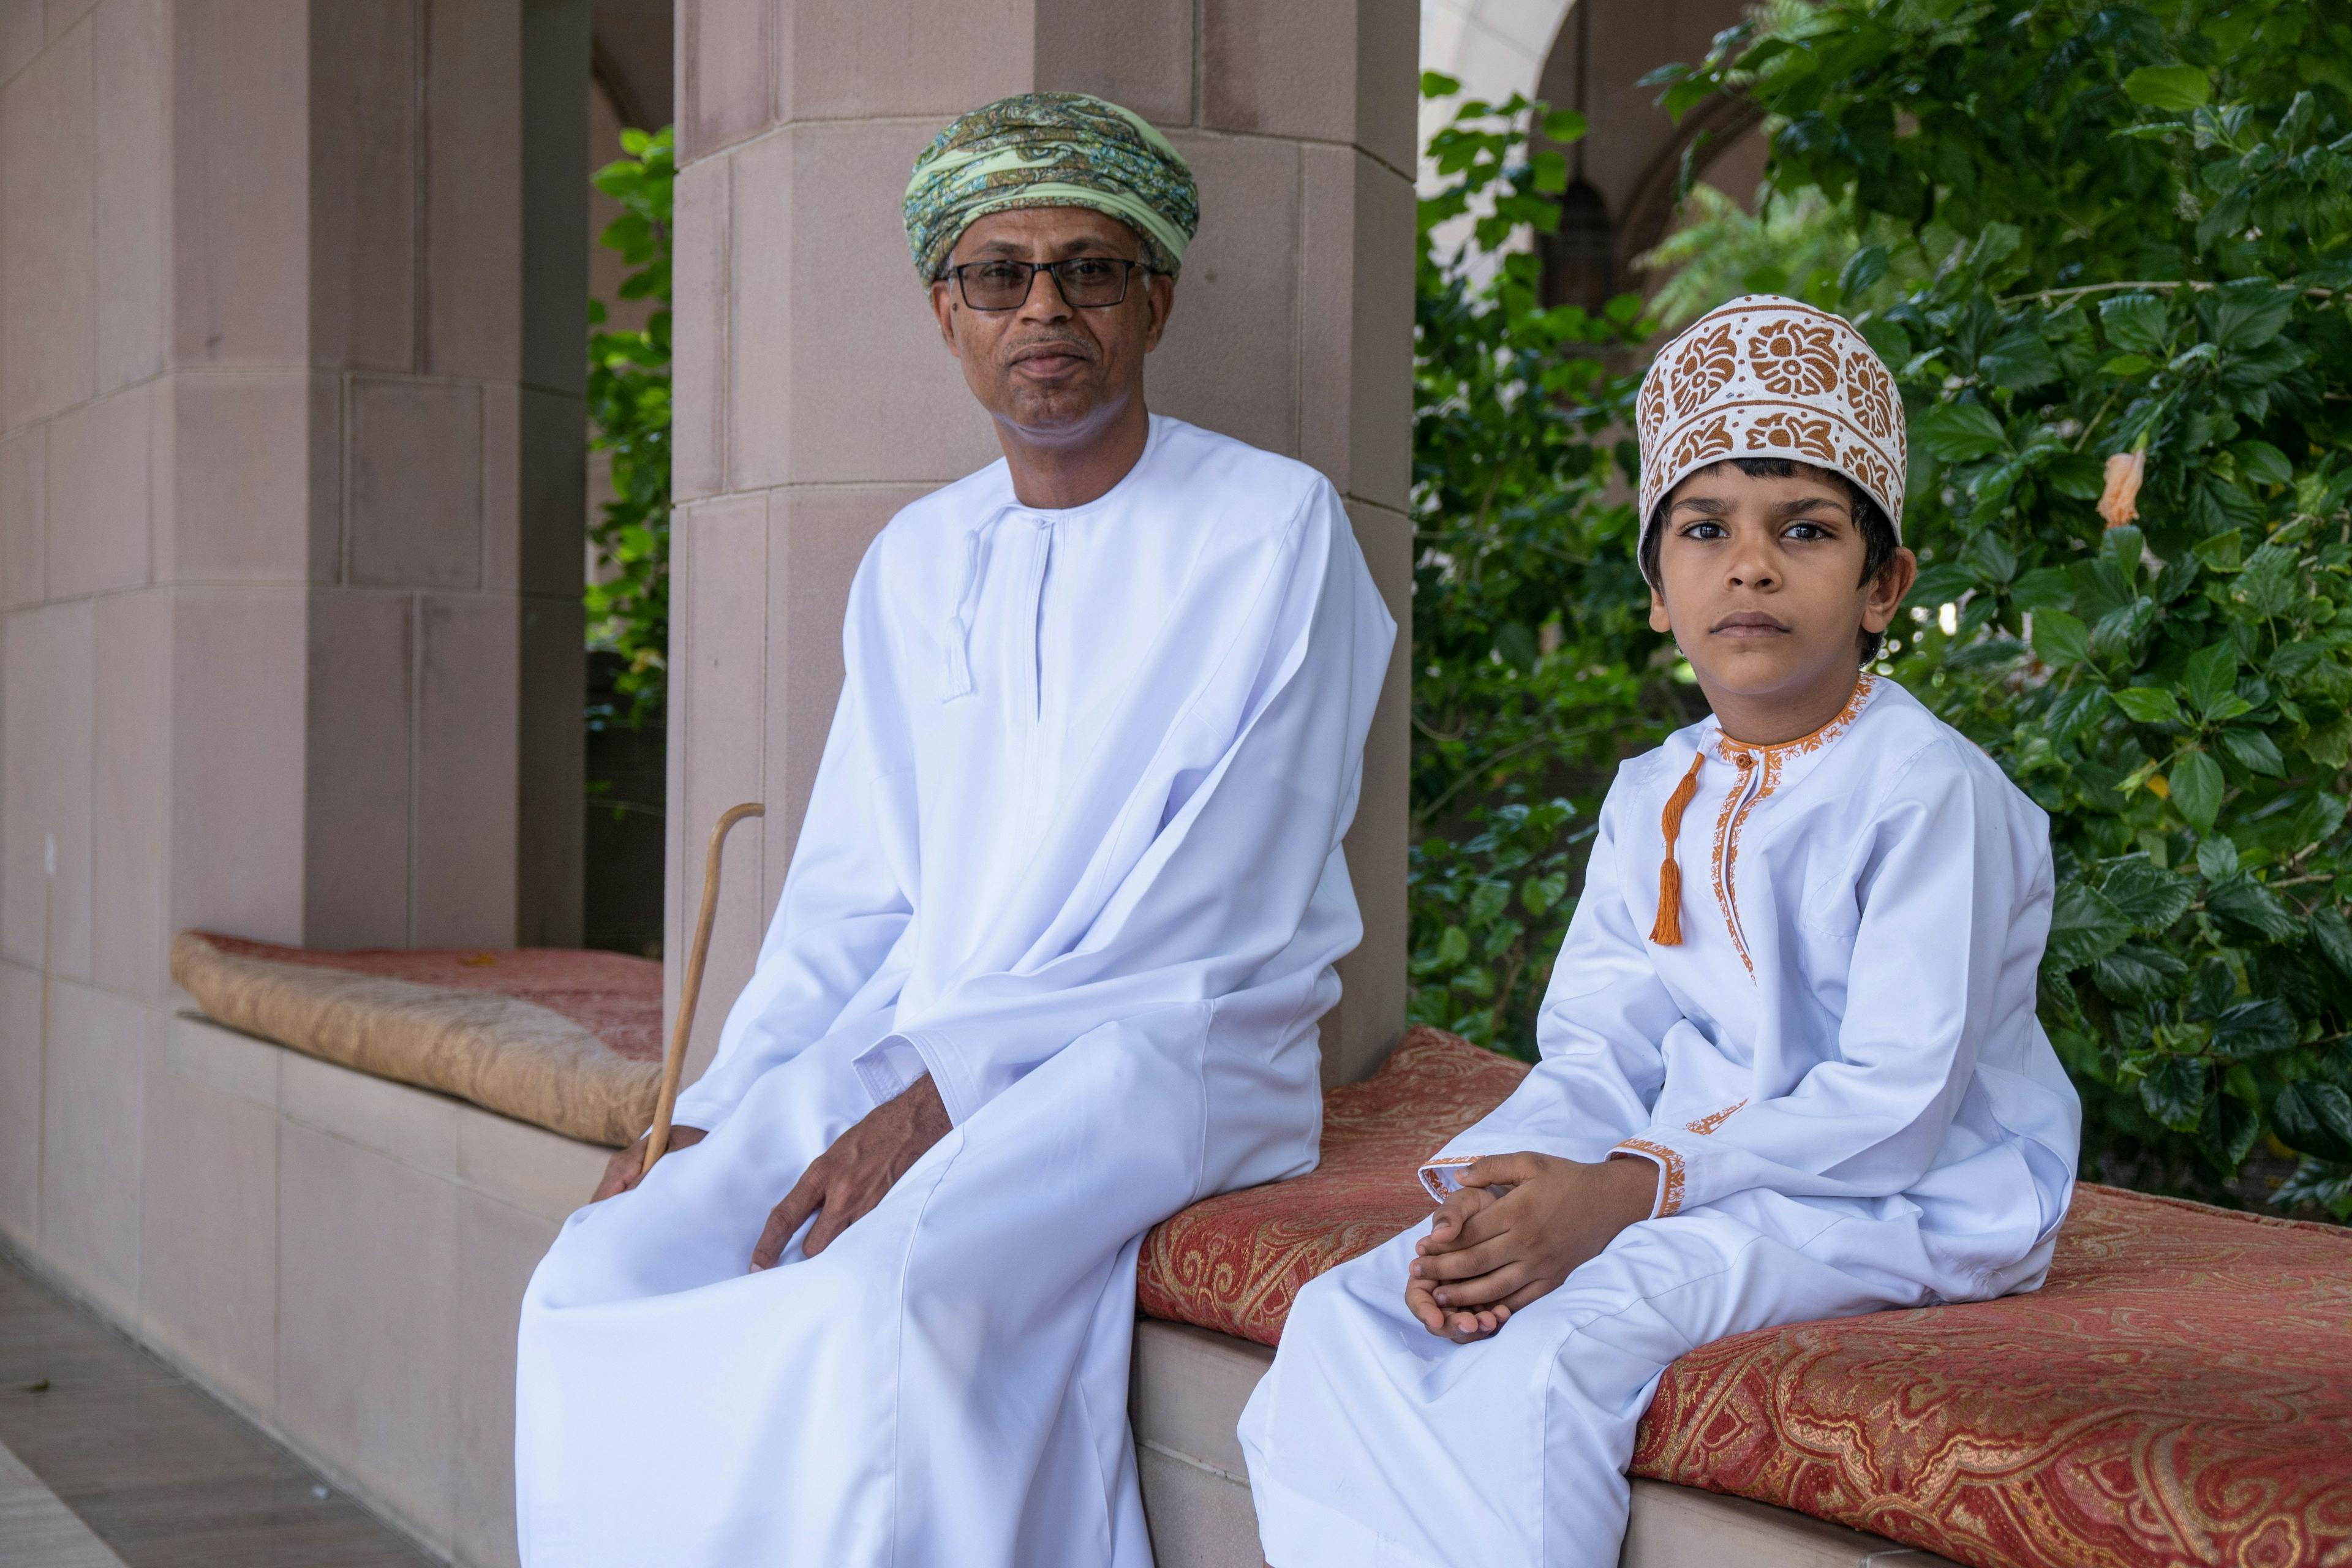 Local boy and man sitting next to a mosque in Oman.